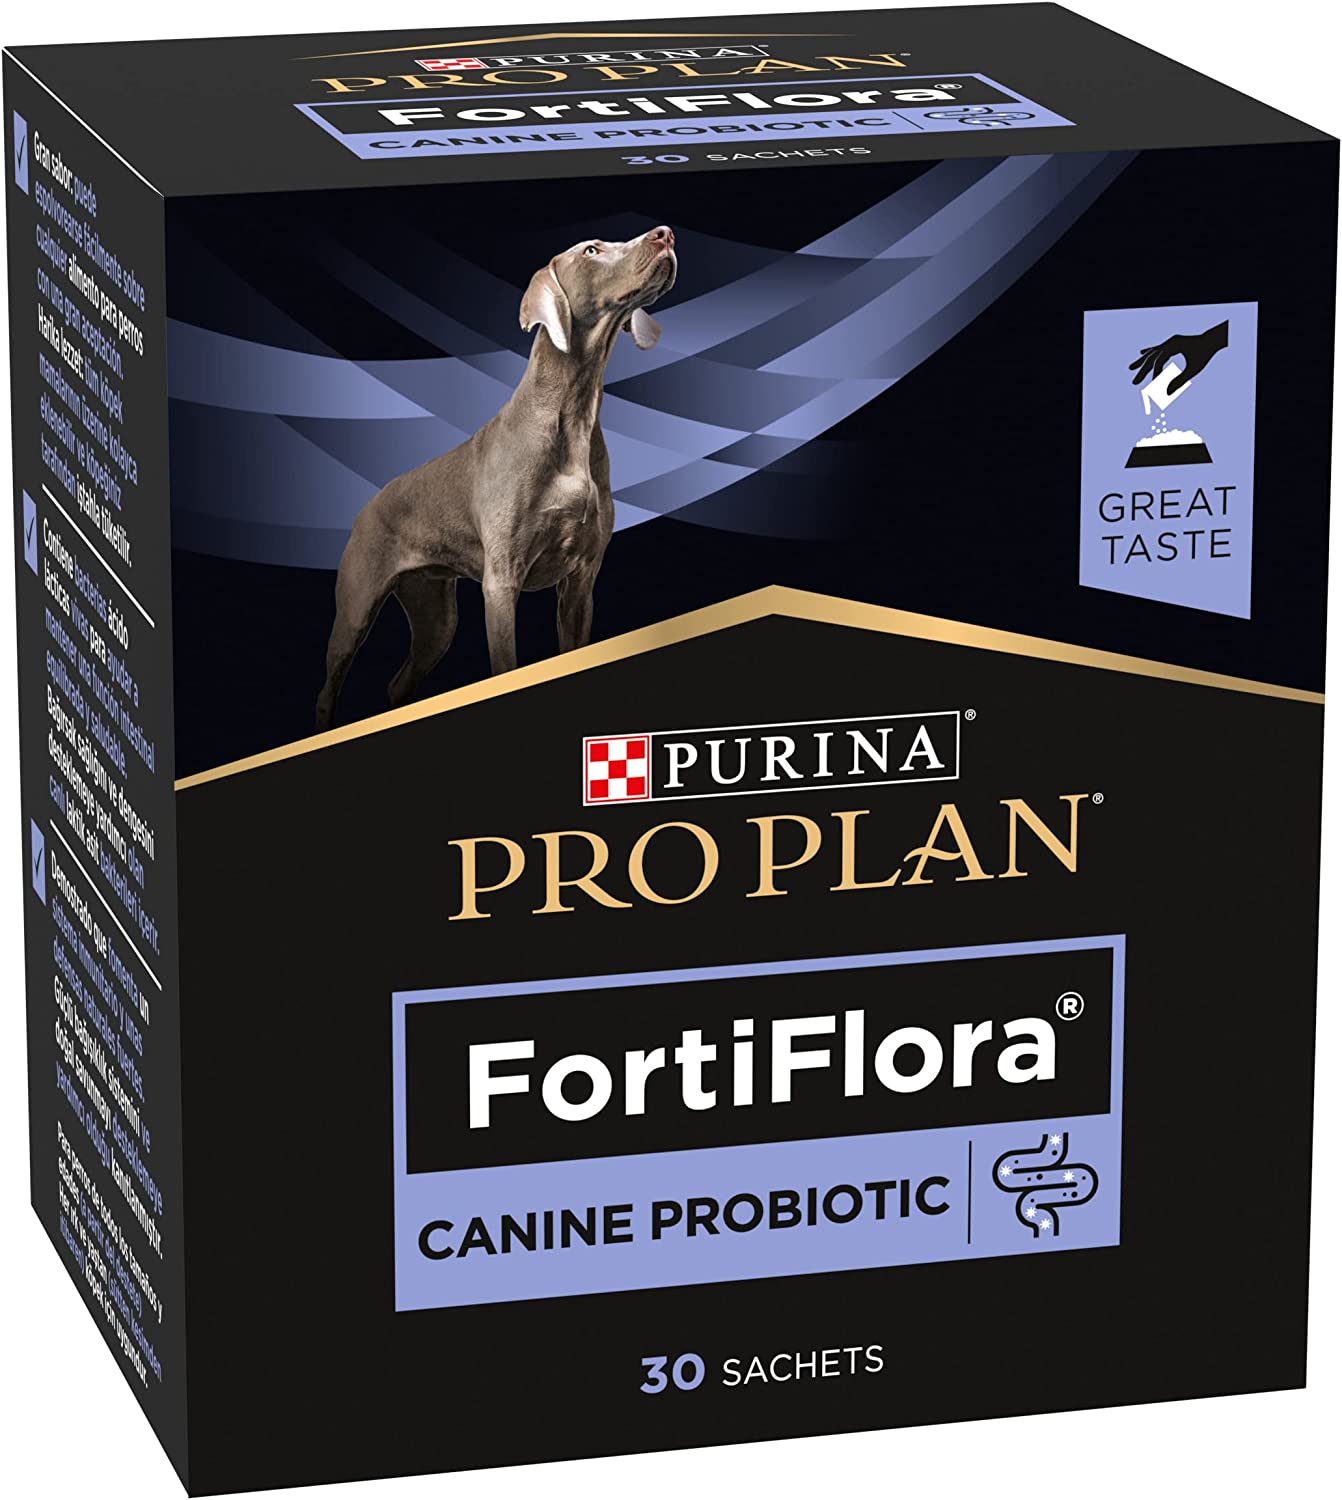 Purina Pro Plan Vd Fortiflora Canine Nutritional Supplement (30X1G)